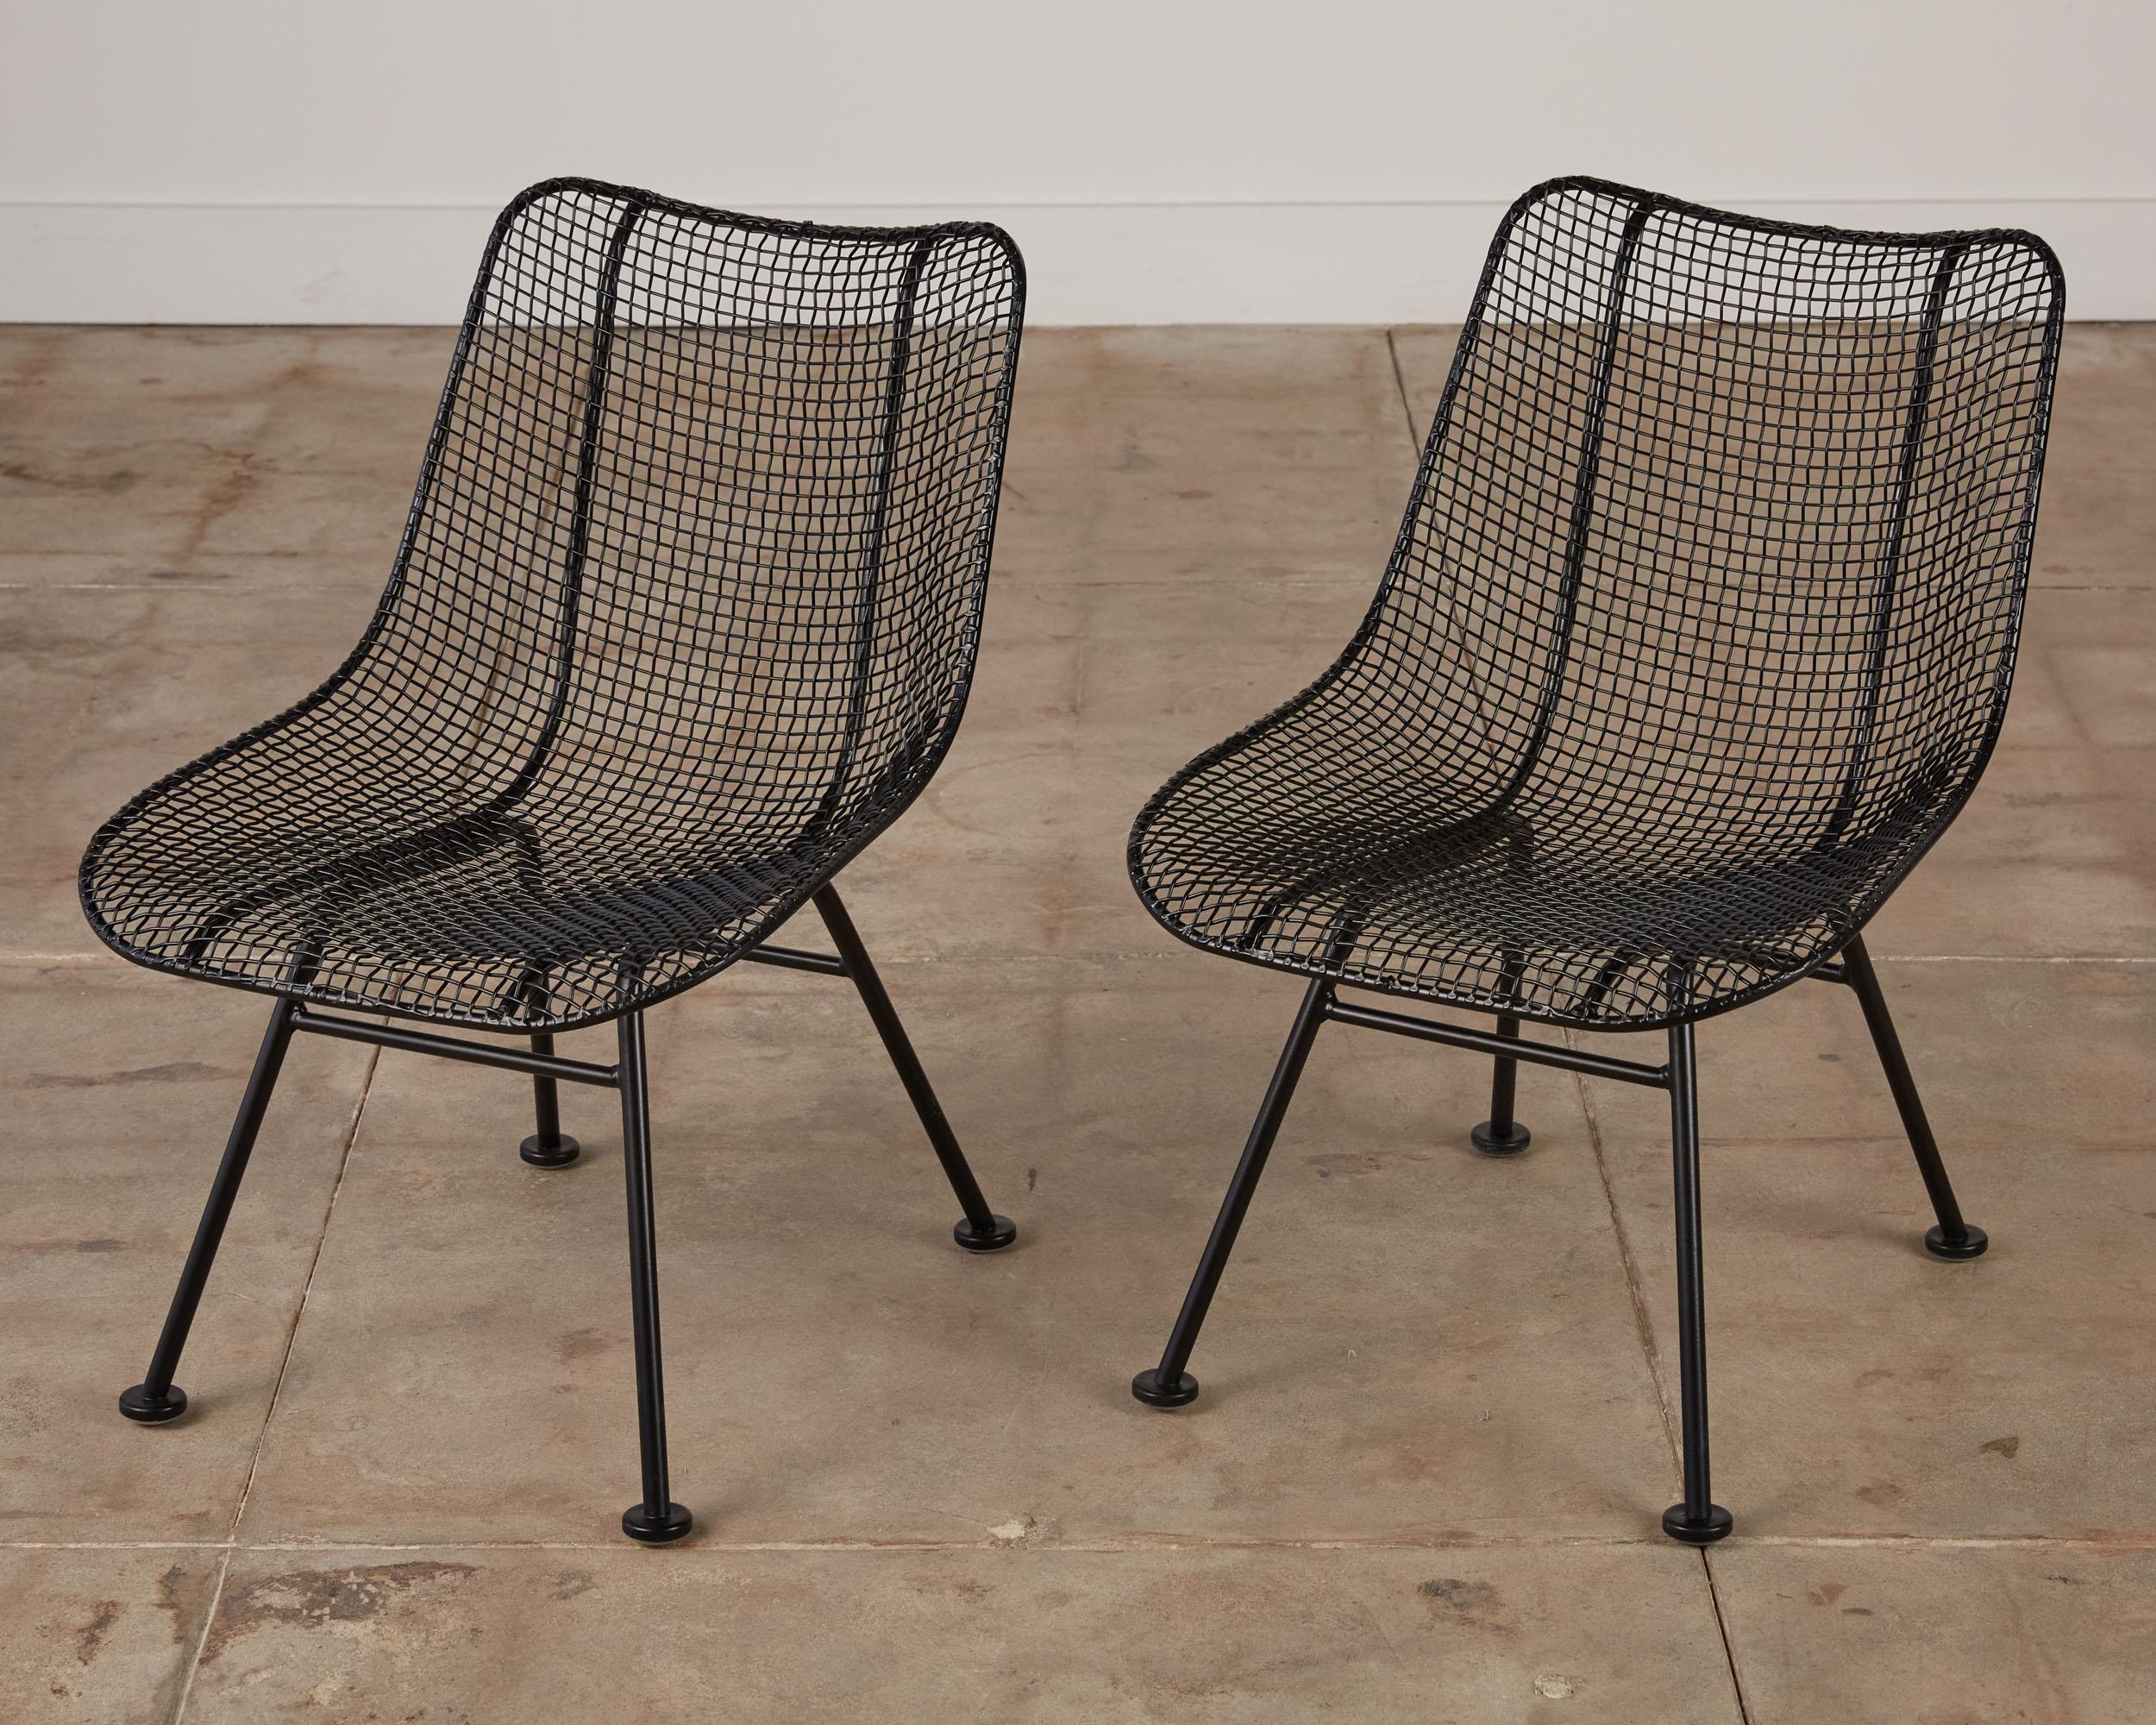 Outdoor dining chairs by Russell Woodard for Woodard Furniture, c.1950s. The side chairs are from Woodard’s “Sculptura” line designed in 1956. Each chair has a molded mesh frame that sits atop four wrought iron legs with disc feet. The chairs have